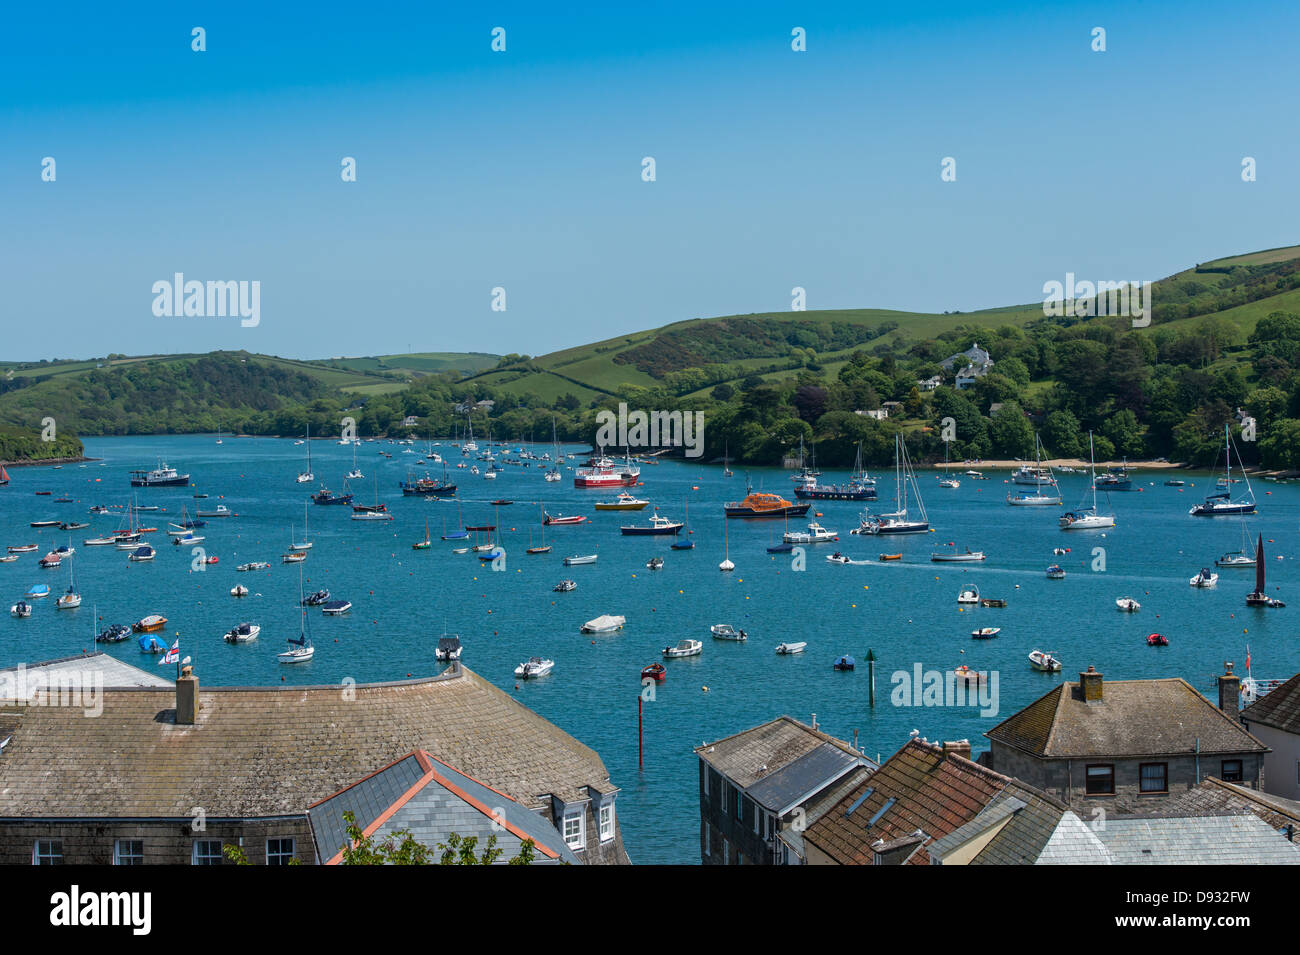 Salcombe, Devon, England. The Salcombe and Kingsbridge Estuary with moored boats and yachts including the ferry. Stock Photo